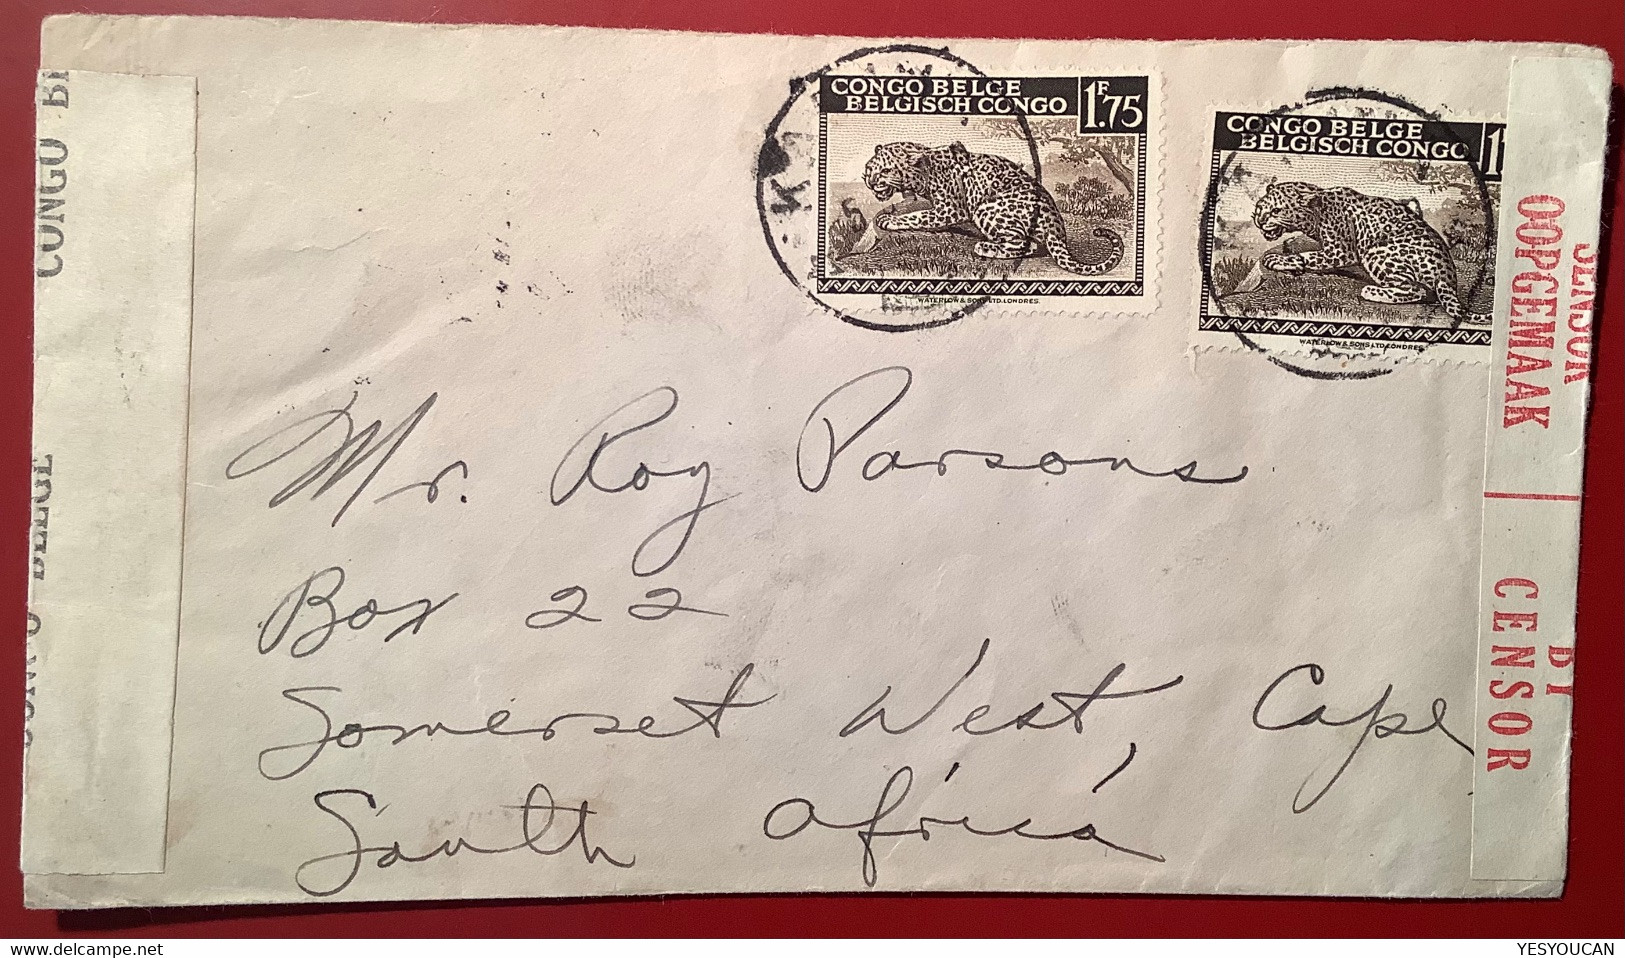 „KAMINA“1945 Double Censored Cover>South Africa 1f75 Leopard(Congo Belge Lettre Censure Belgian Congo WW2 War 1939-1945 - Covers & Documents